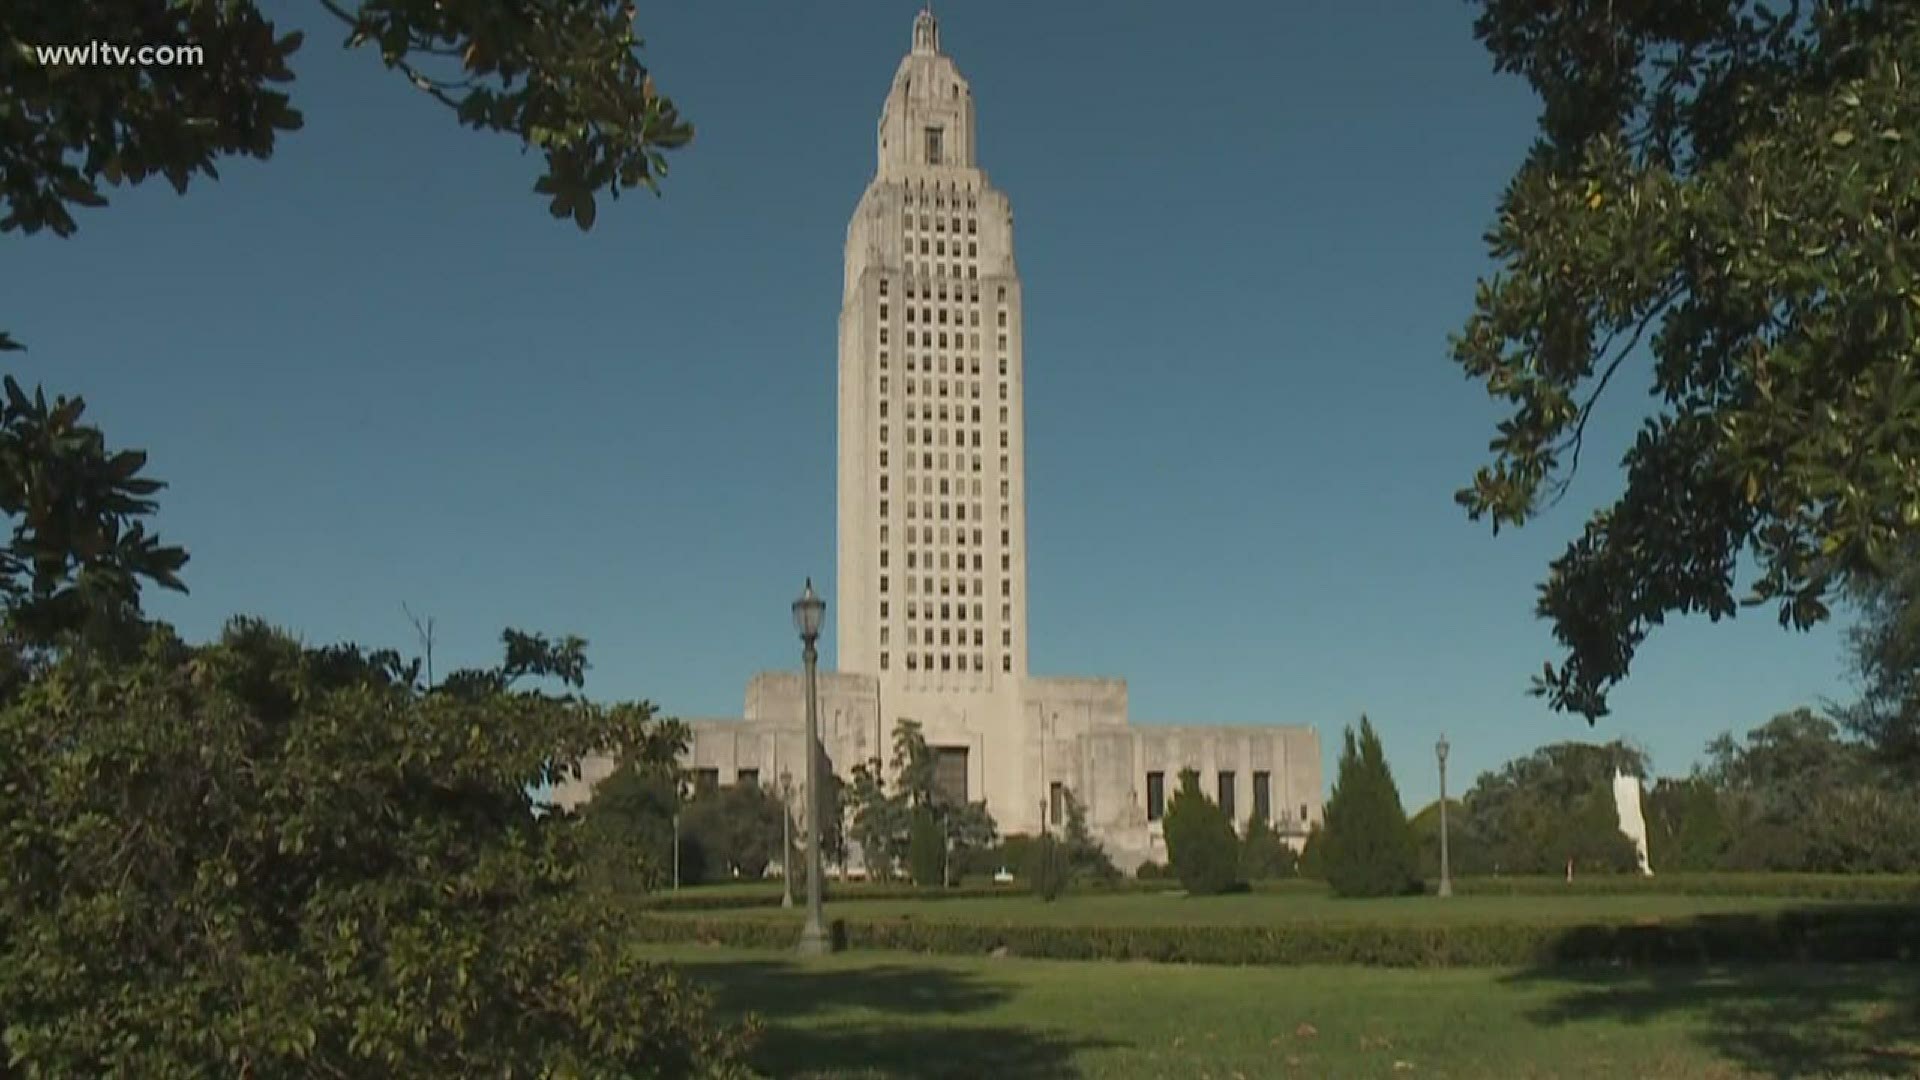 Louisiana lawmakers are restarting their legislative session Monday in a state reshaped by the coronavirus pandemic.